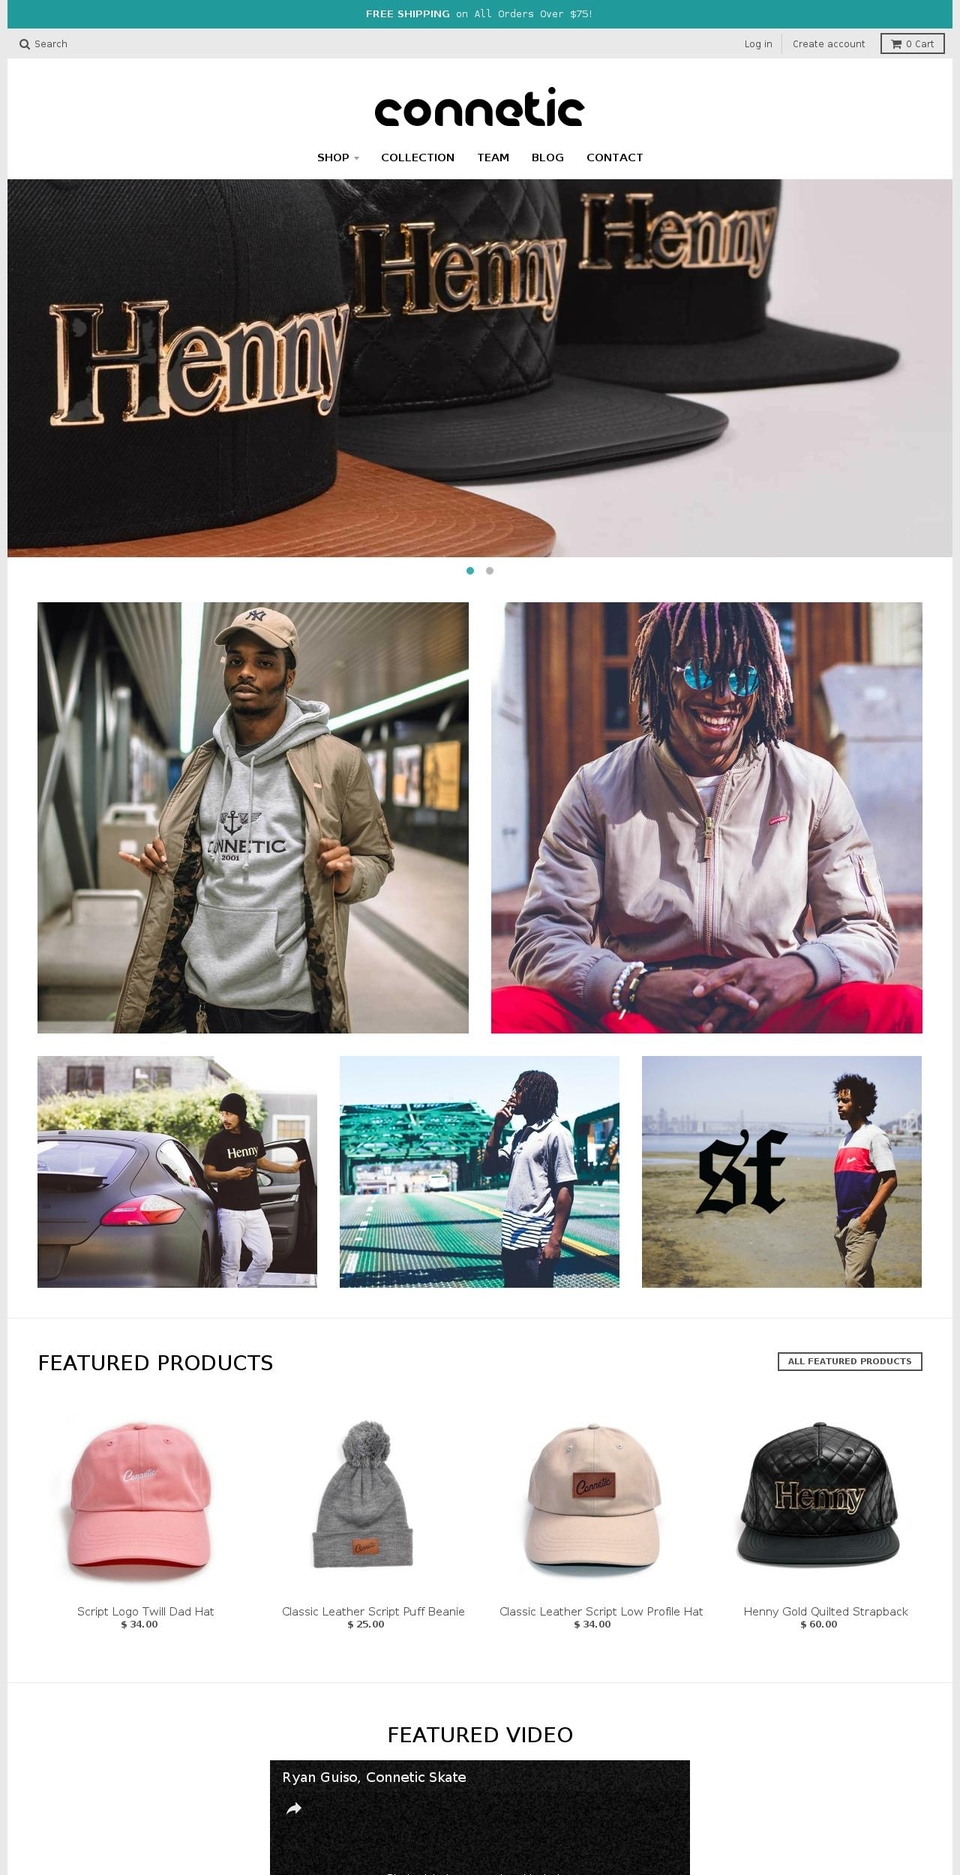 District Shopify theme site example conneticlife.com